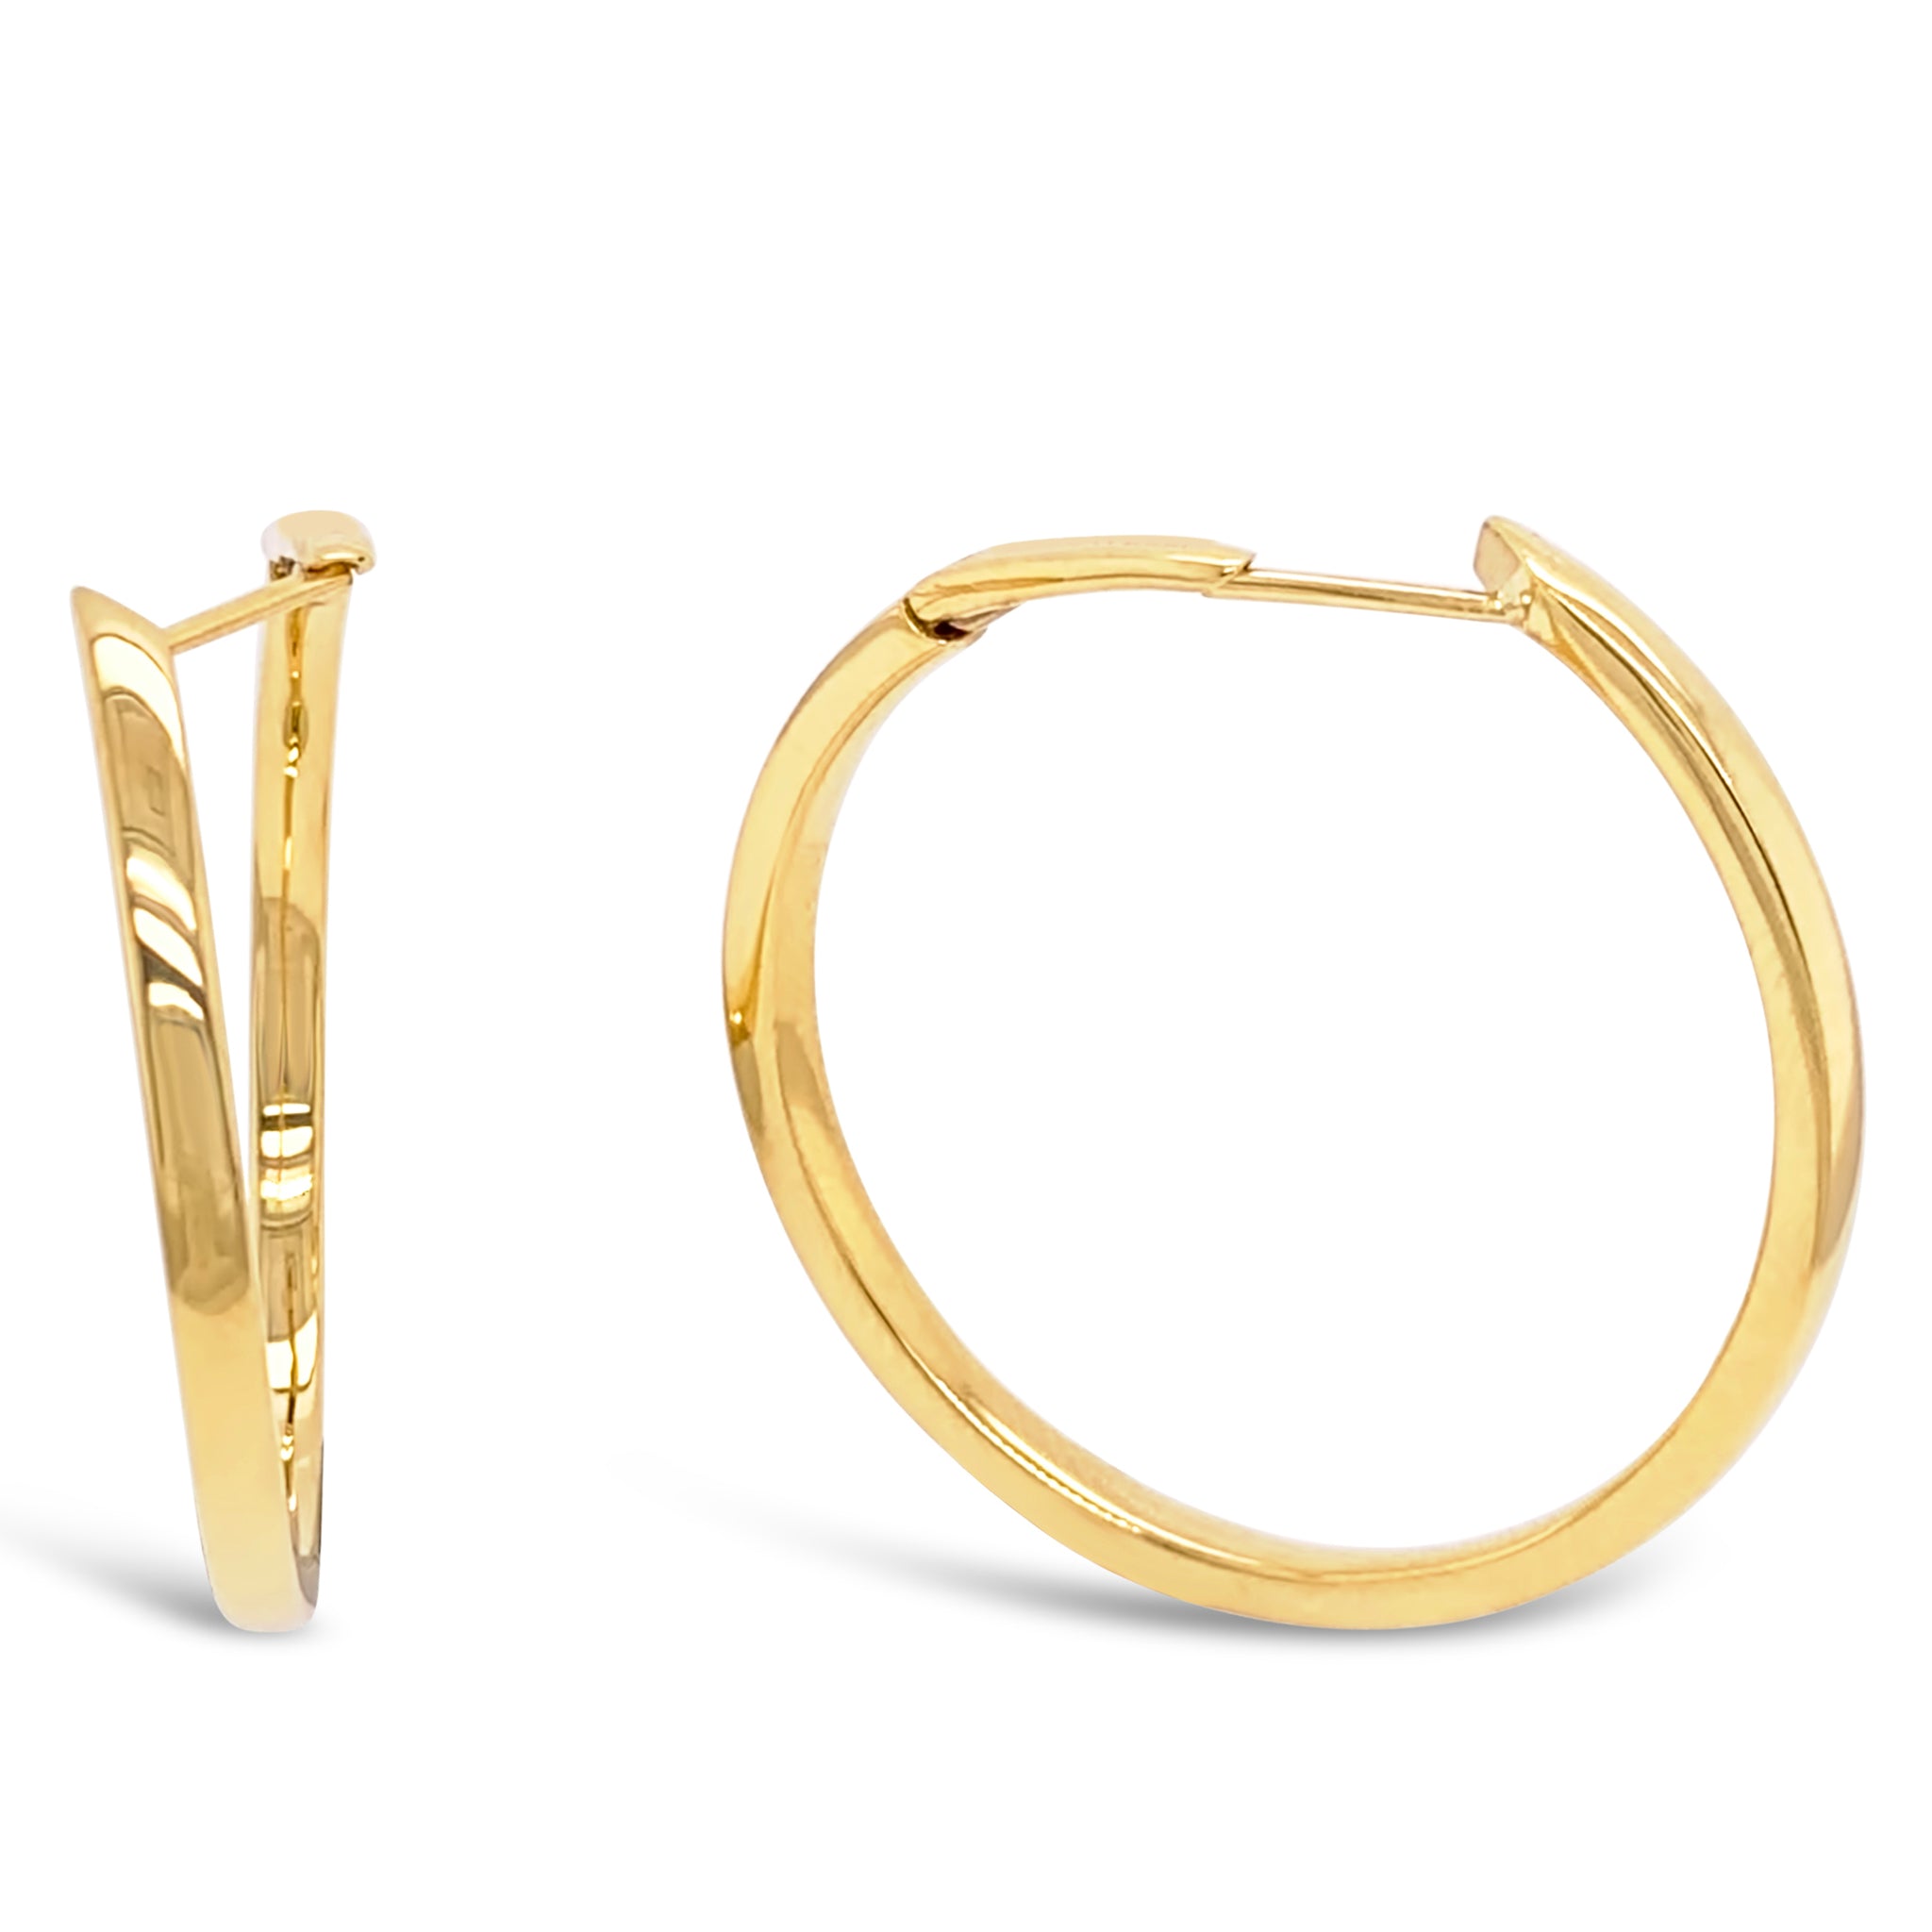 Gold Round Hoop Earrings Small